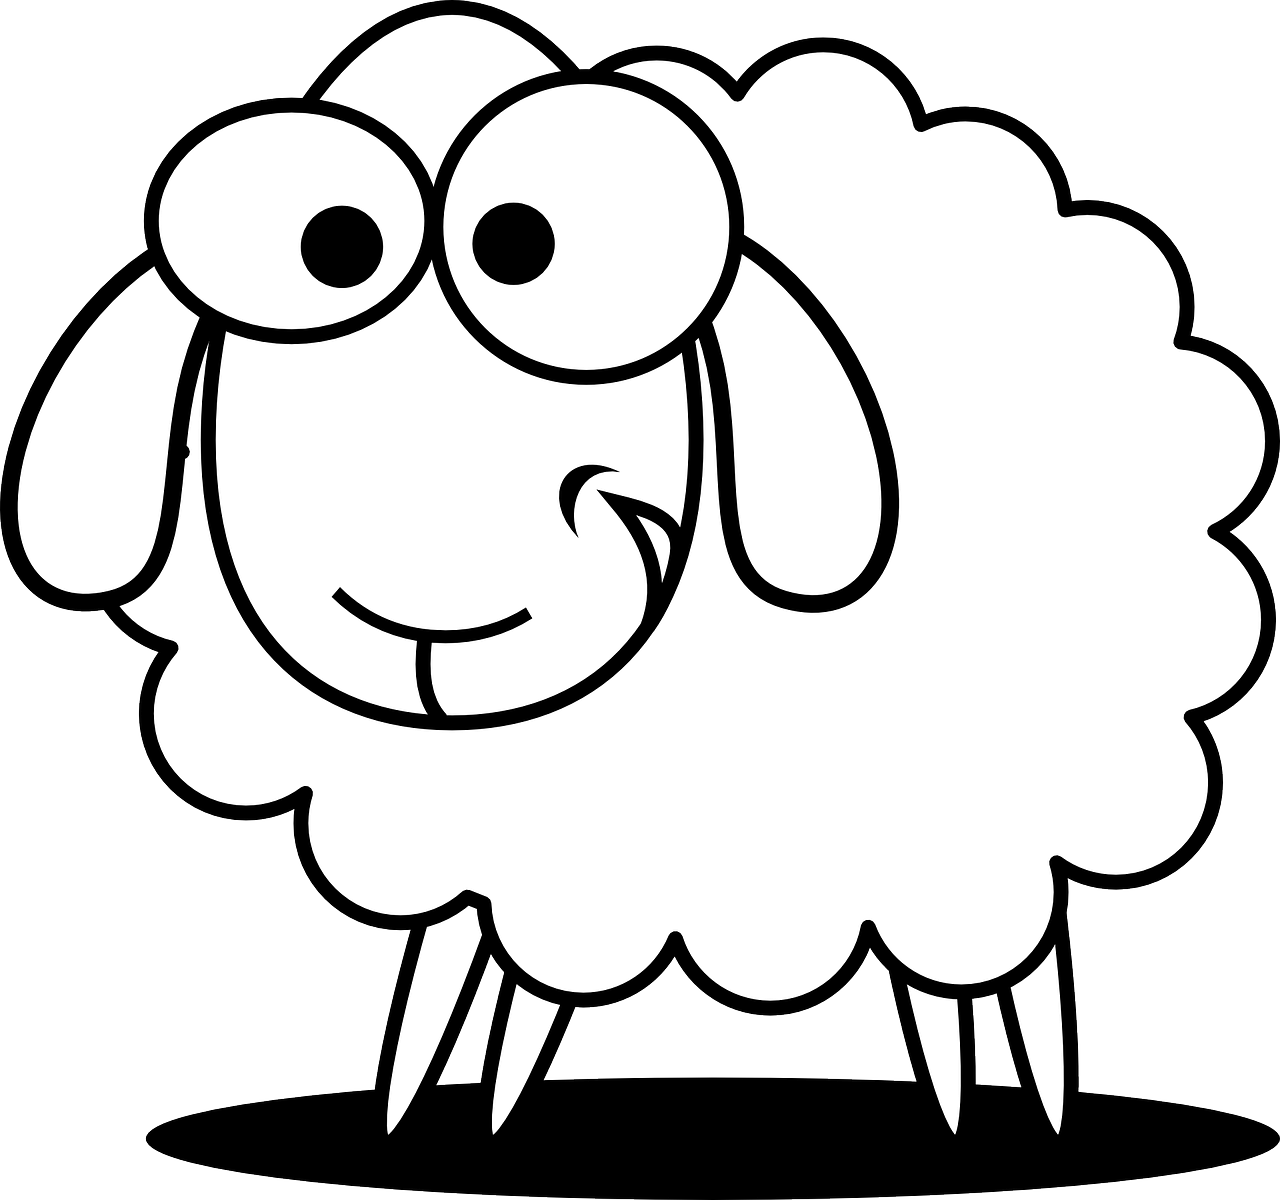 Clipart sheep easy.